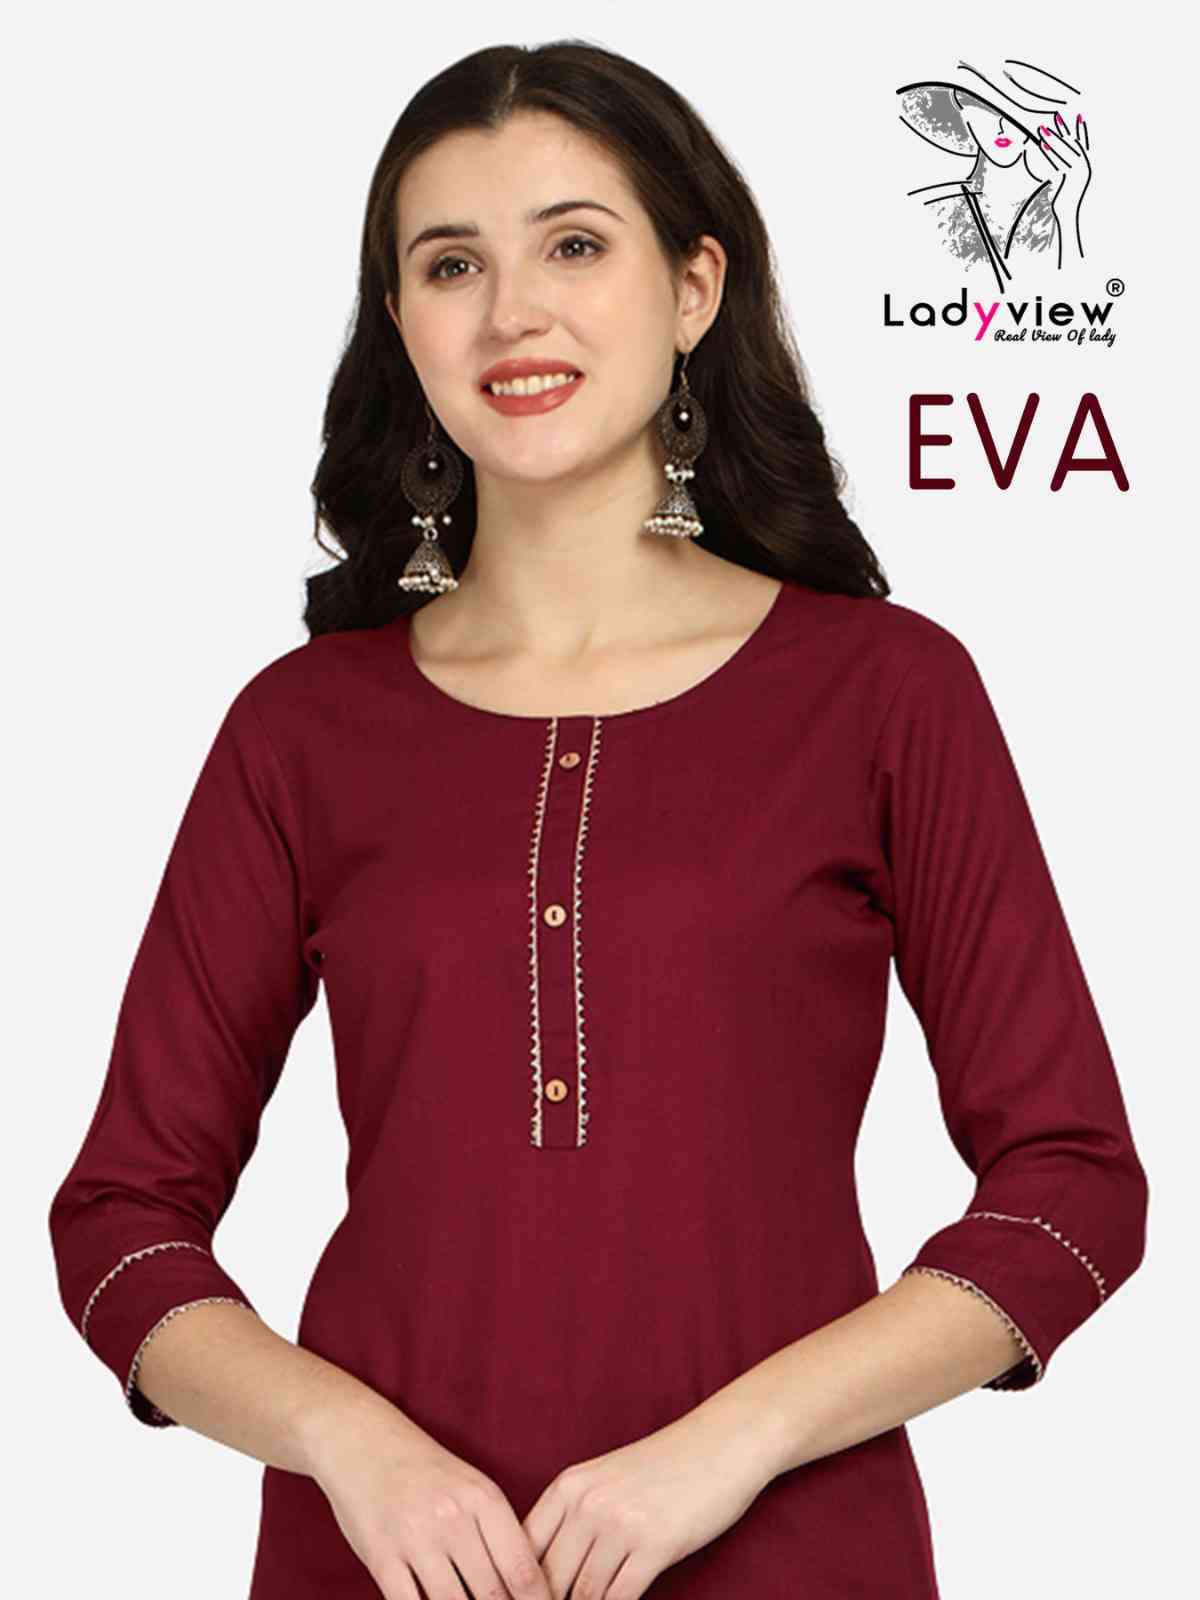 Ladyview Eva Fancy Formal Wear Straight Kurti Pant Collection Supplier